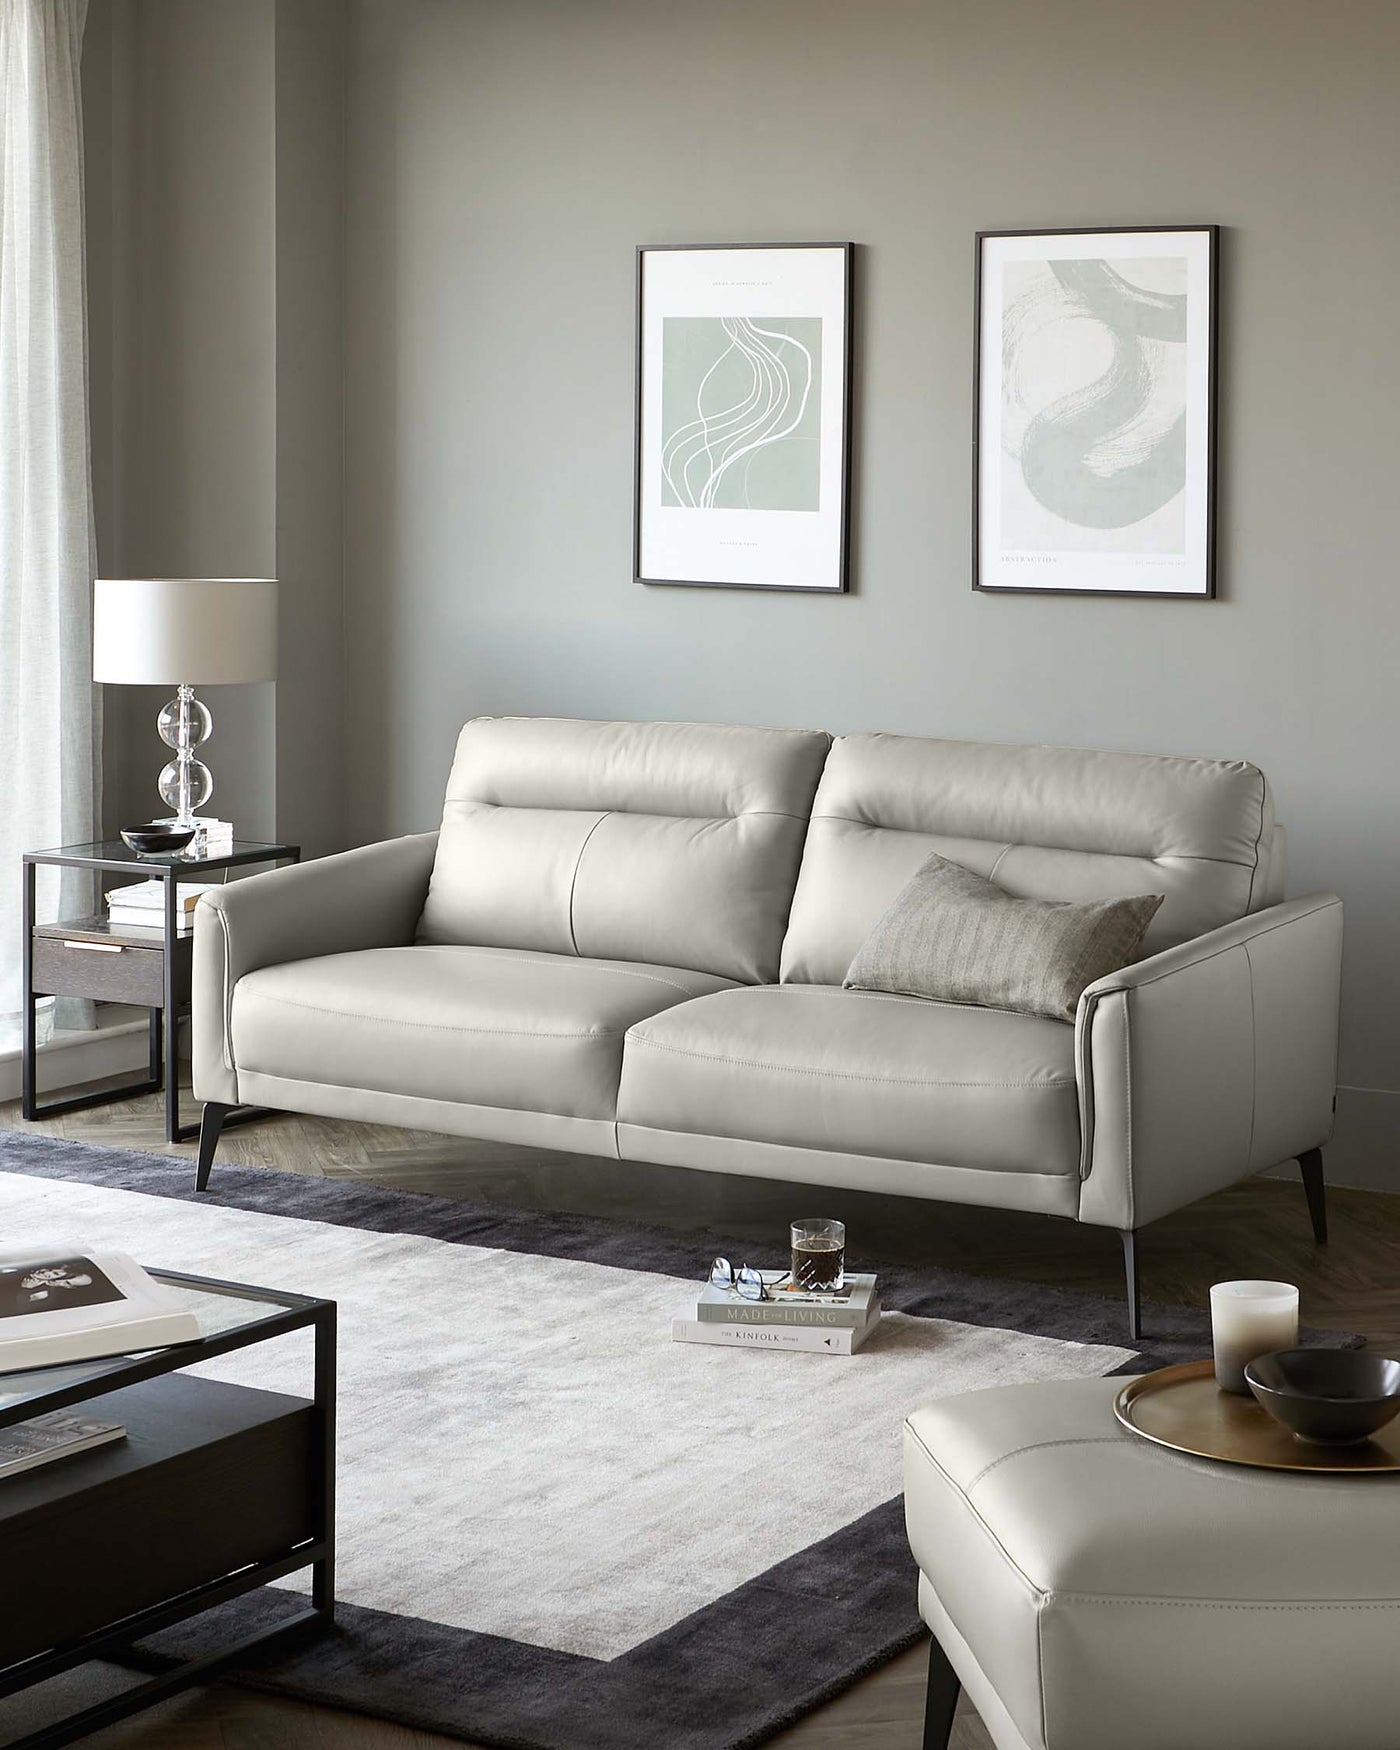 Elegant living room setup featuring a light grey leather sofa with clean lines and metallic legs, paired with plush cushions. Adjacent are two mirrored side tables with dark frames and a clear glass lamp on one of them. A dark wood coffee table with a metallic rim sits atop a two-tone grey area rug, completing the sophisticated space.